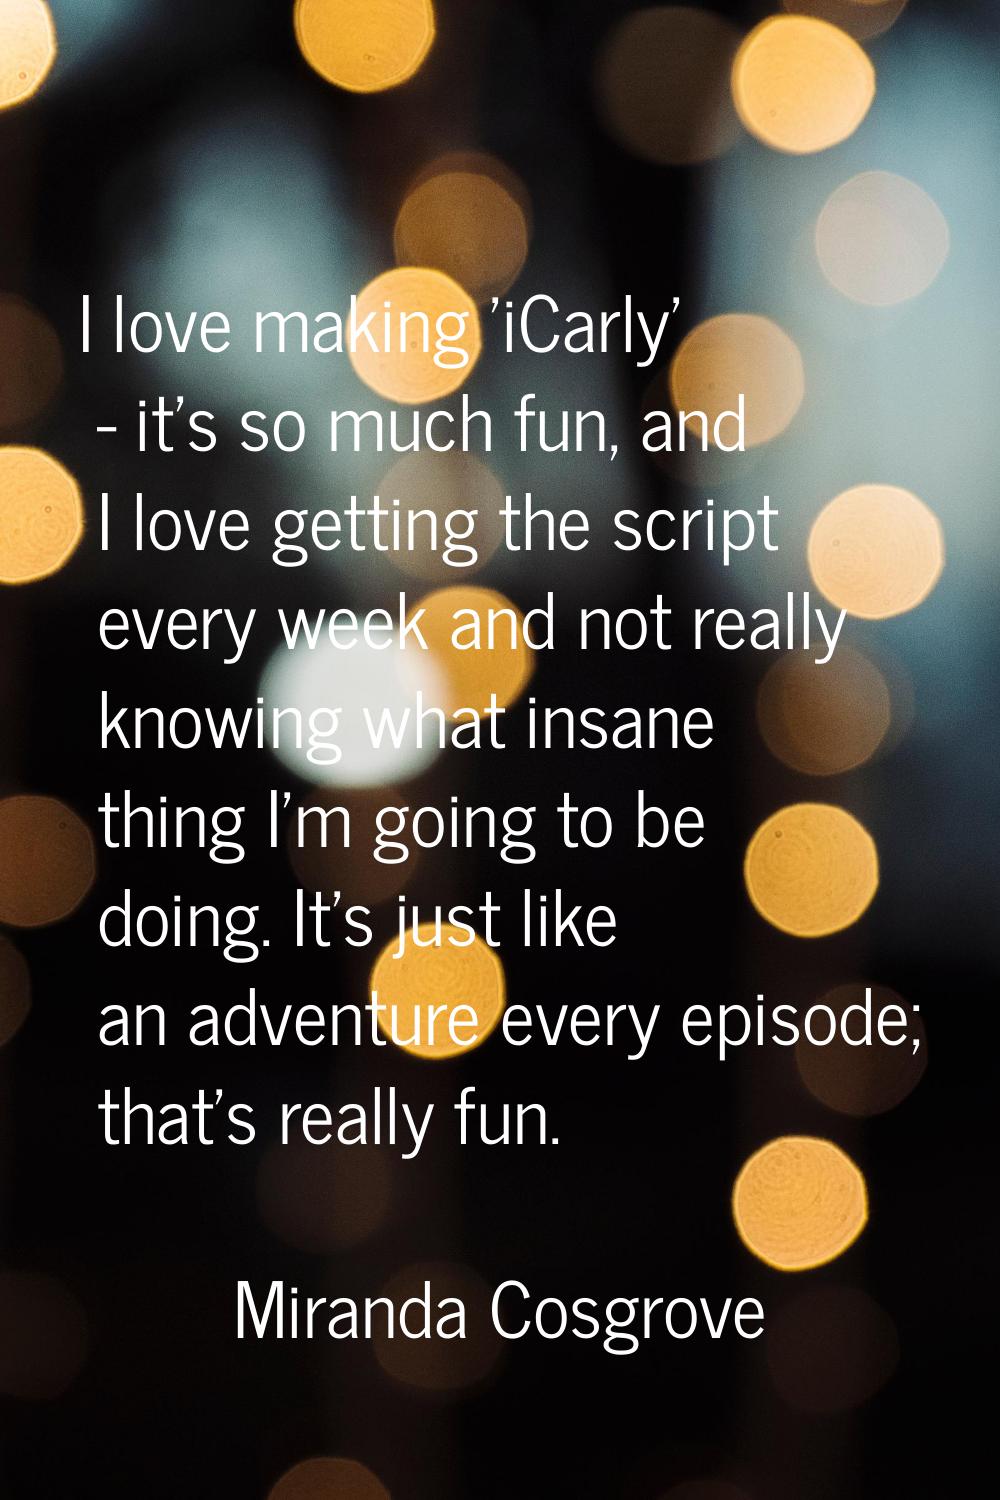 I love making 'iCarly' - it's so much fun, and I love getting the script every week and not really 